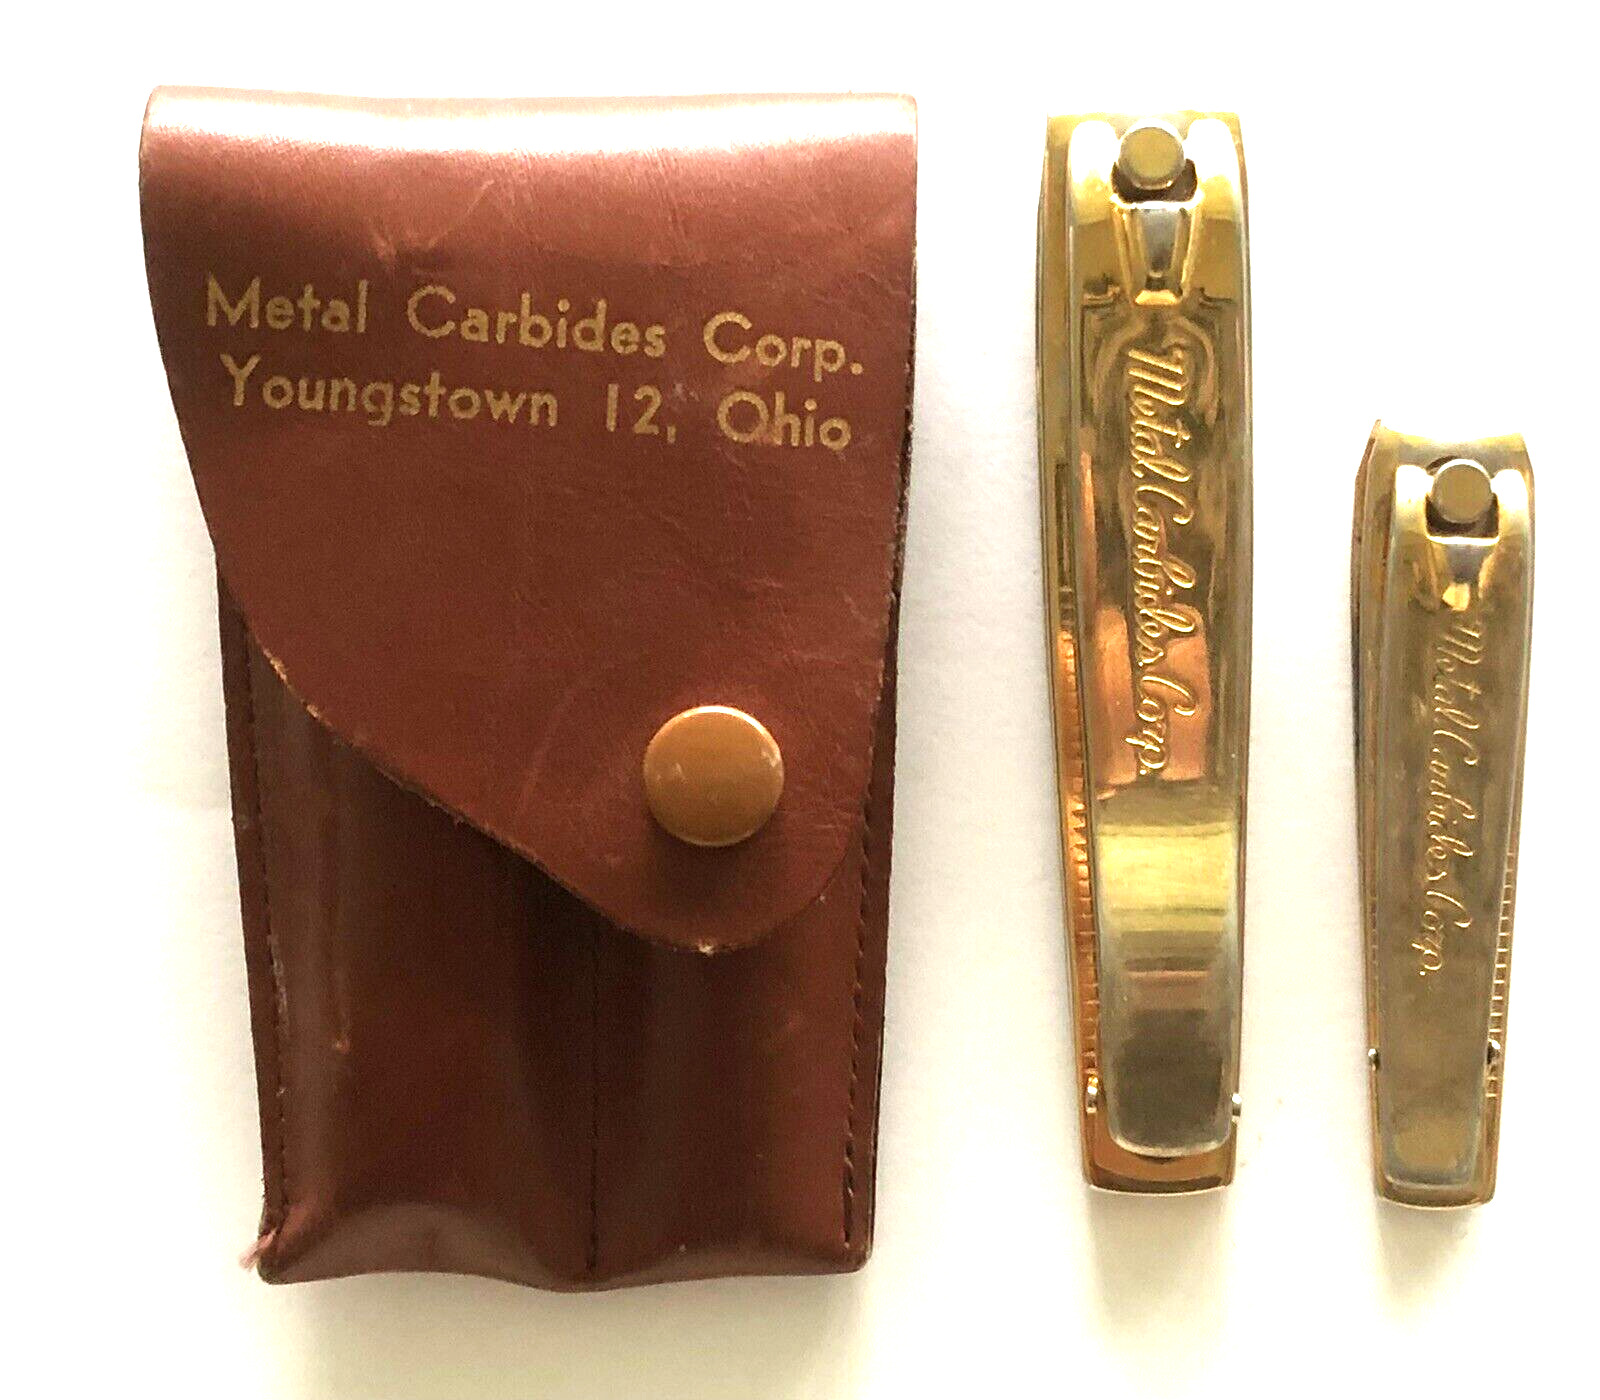 VINTAGE 1940s 1950s METAL CARBIDE CORP ADVERTISING GOLD TONE CLIPPERS WITH CASE